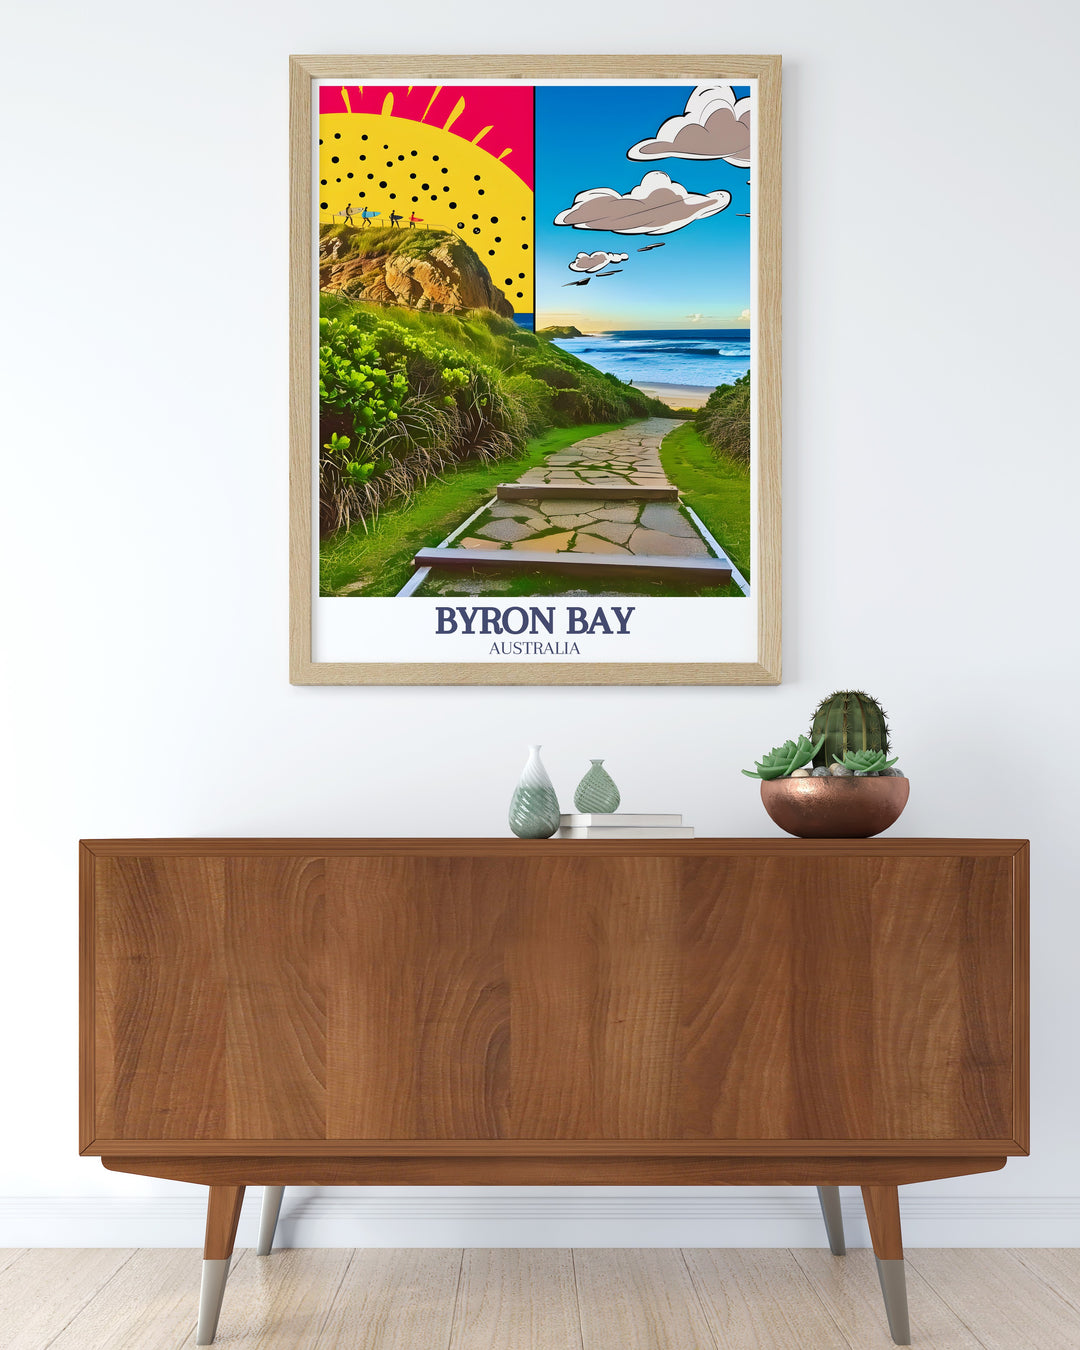 Fine Line Print of Byron Bay with Cape Byron Walking Track and Byron beach a perfect gift for special occasions like anniversaries or birthdays. This detailed city print adds a modern and elegant touch to your decor.